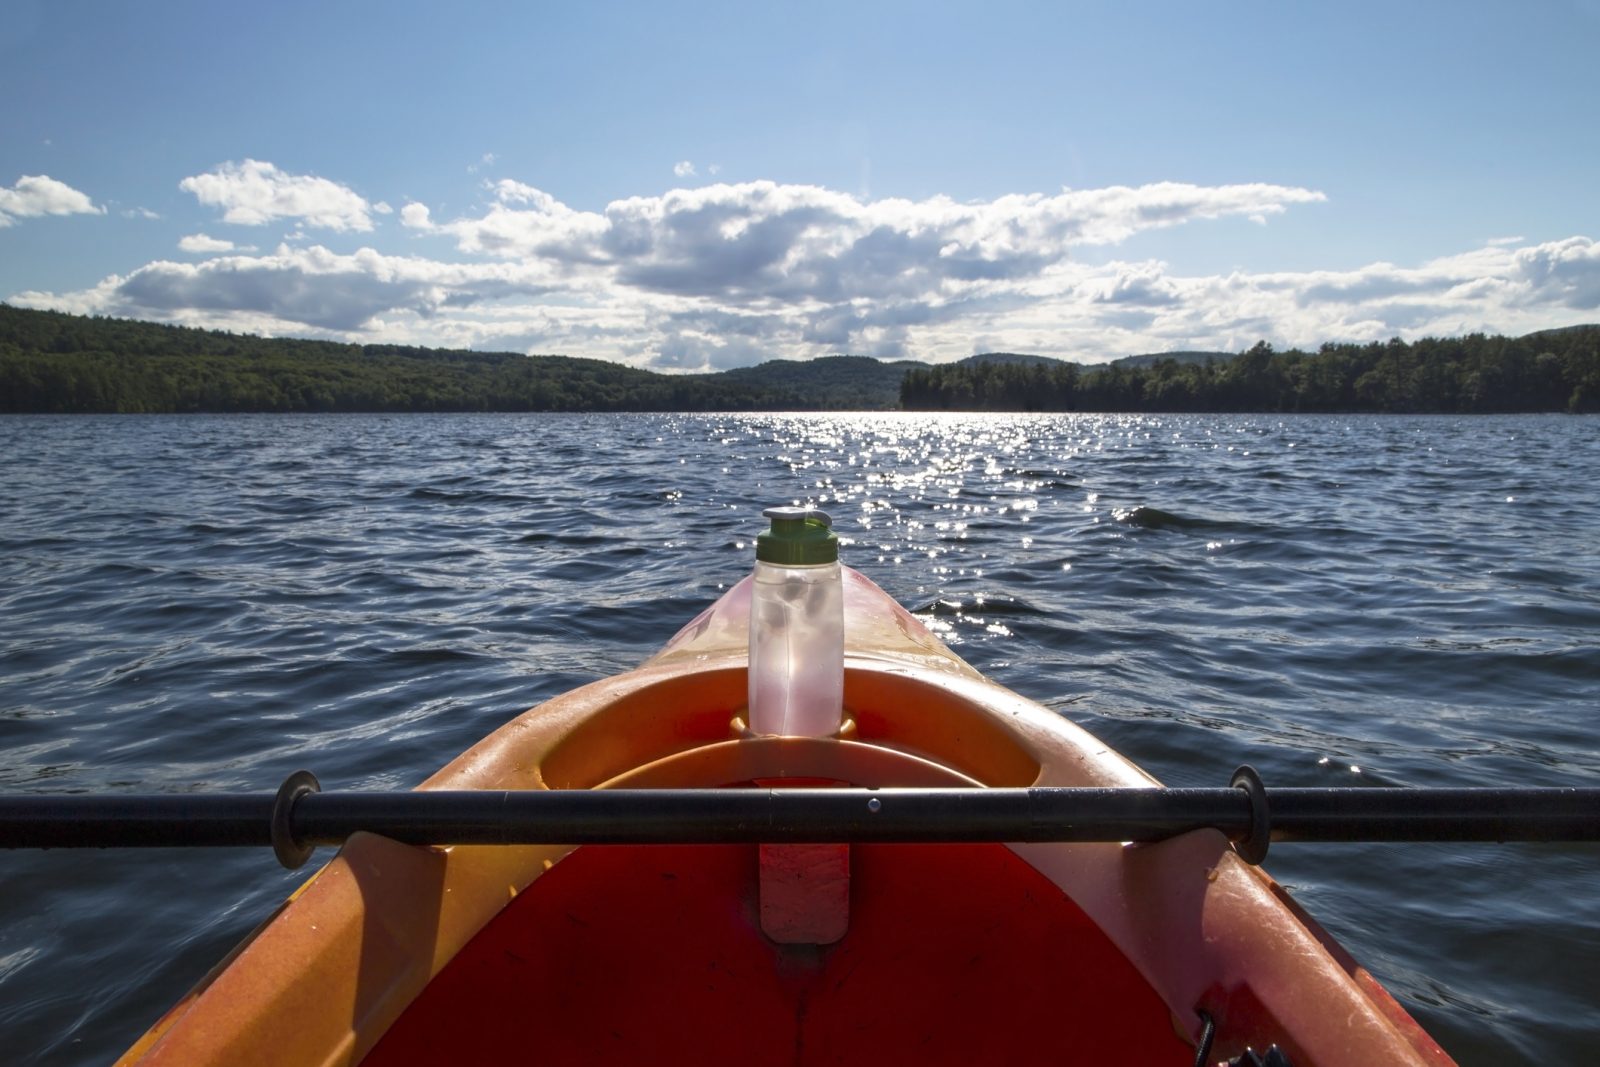 A kayak with a reusable water bottle at the front.